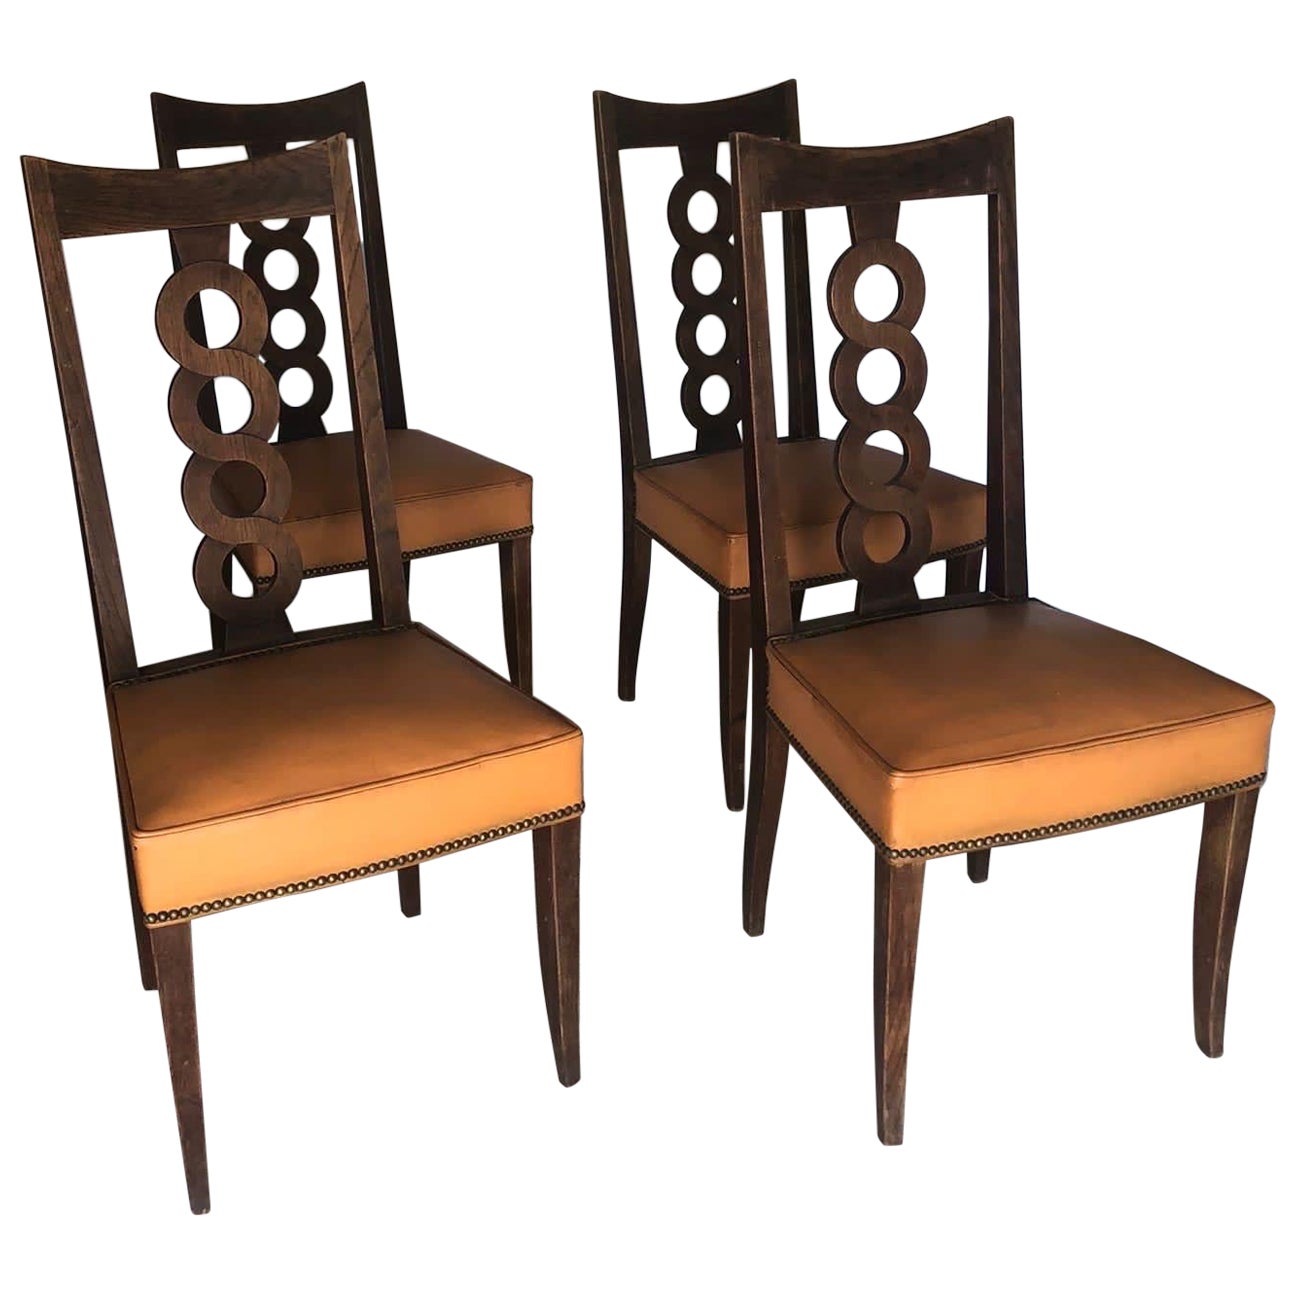 Victor Courtray set of four chairs